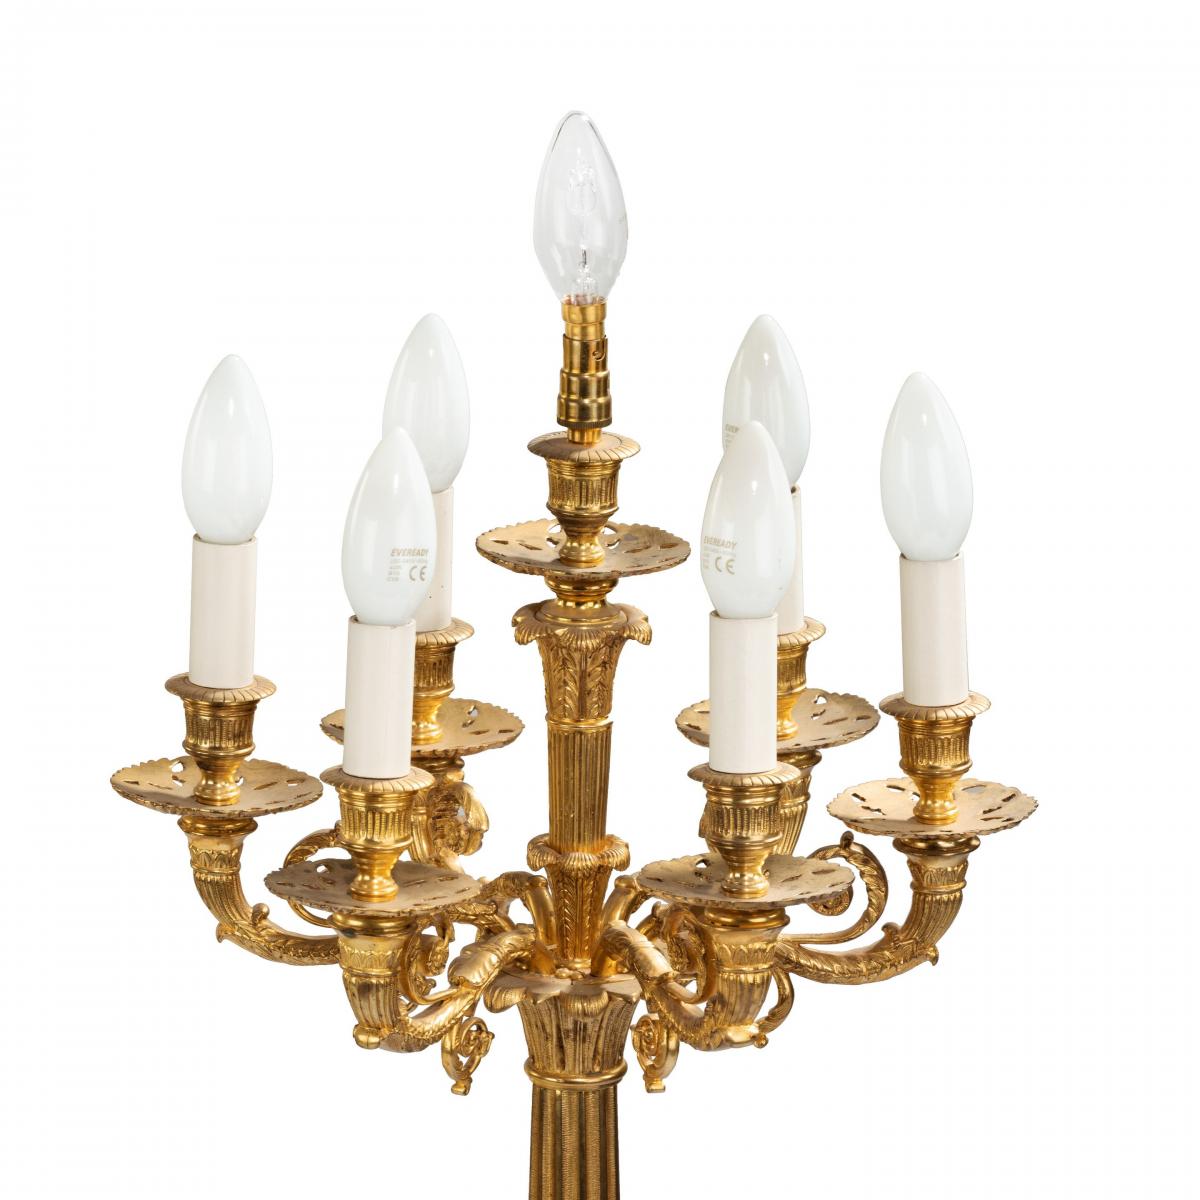 A large pair of onyx and ormolu lamps